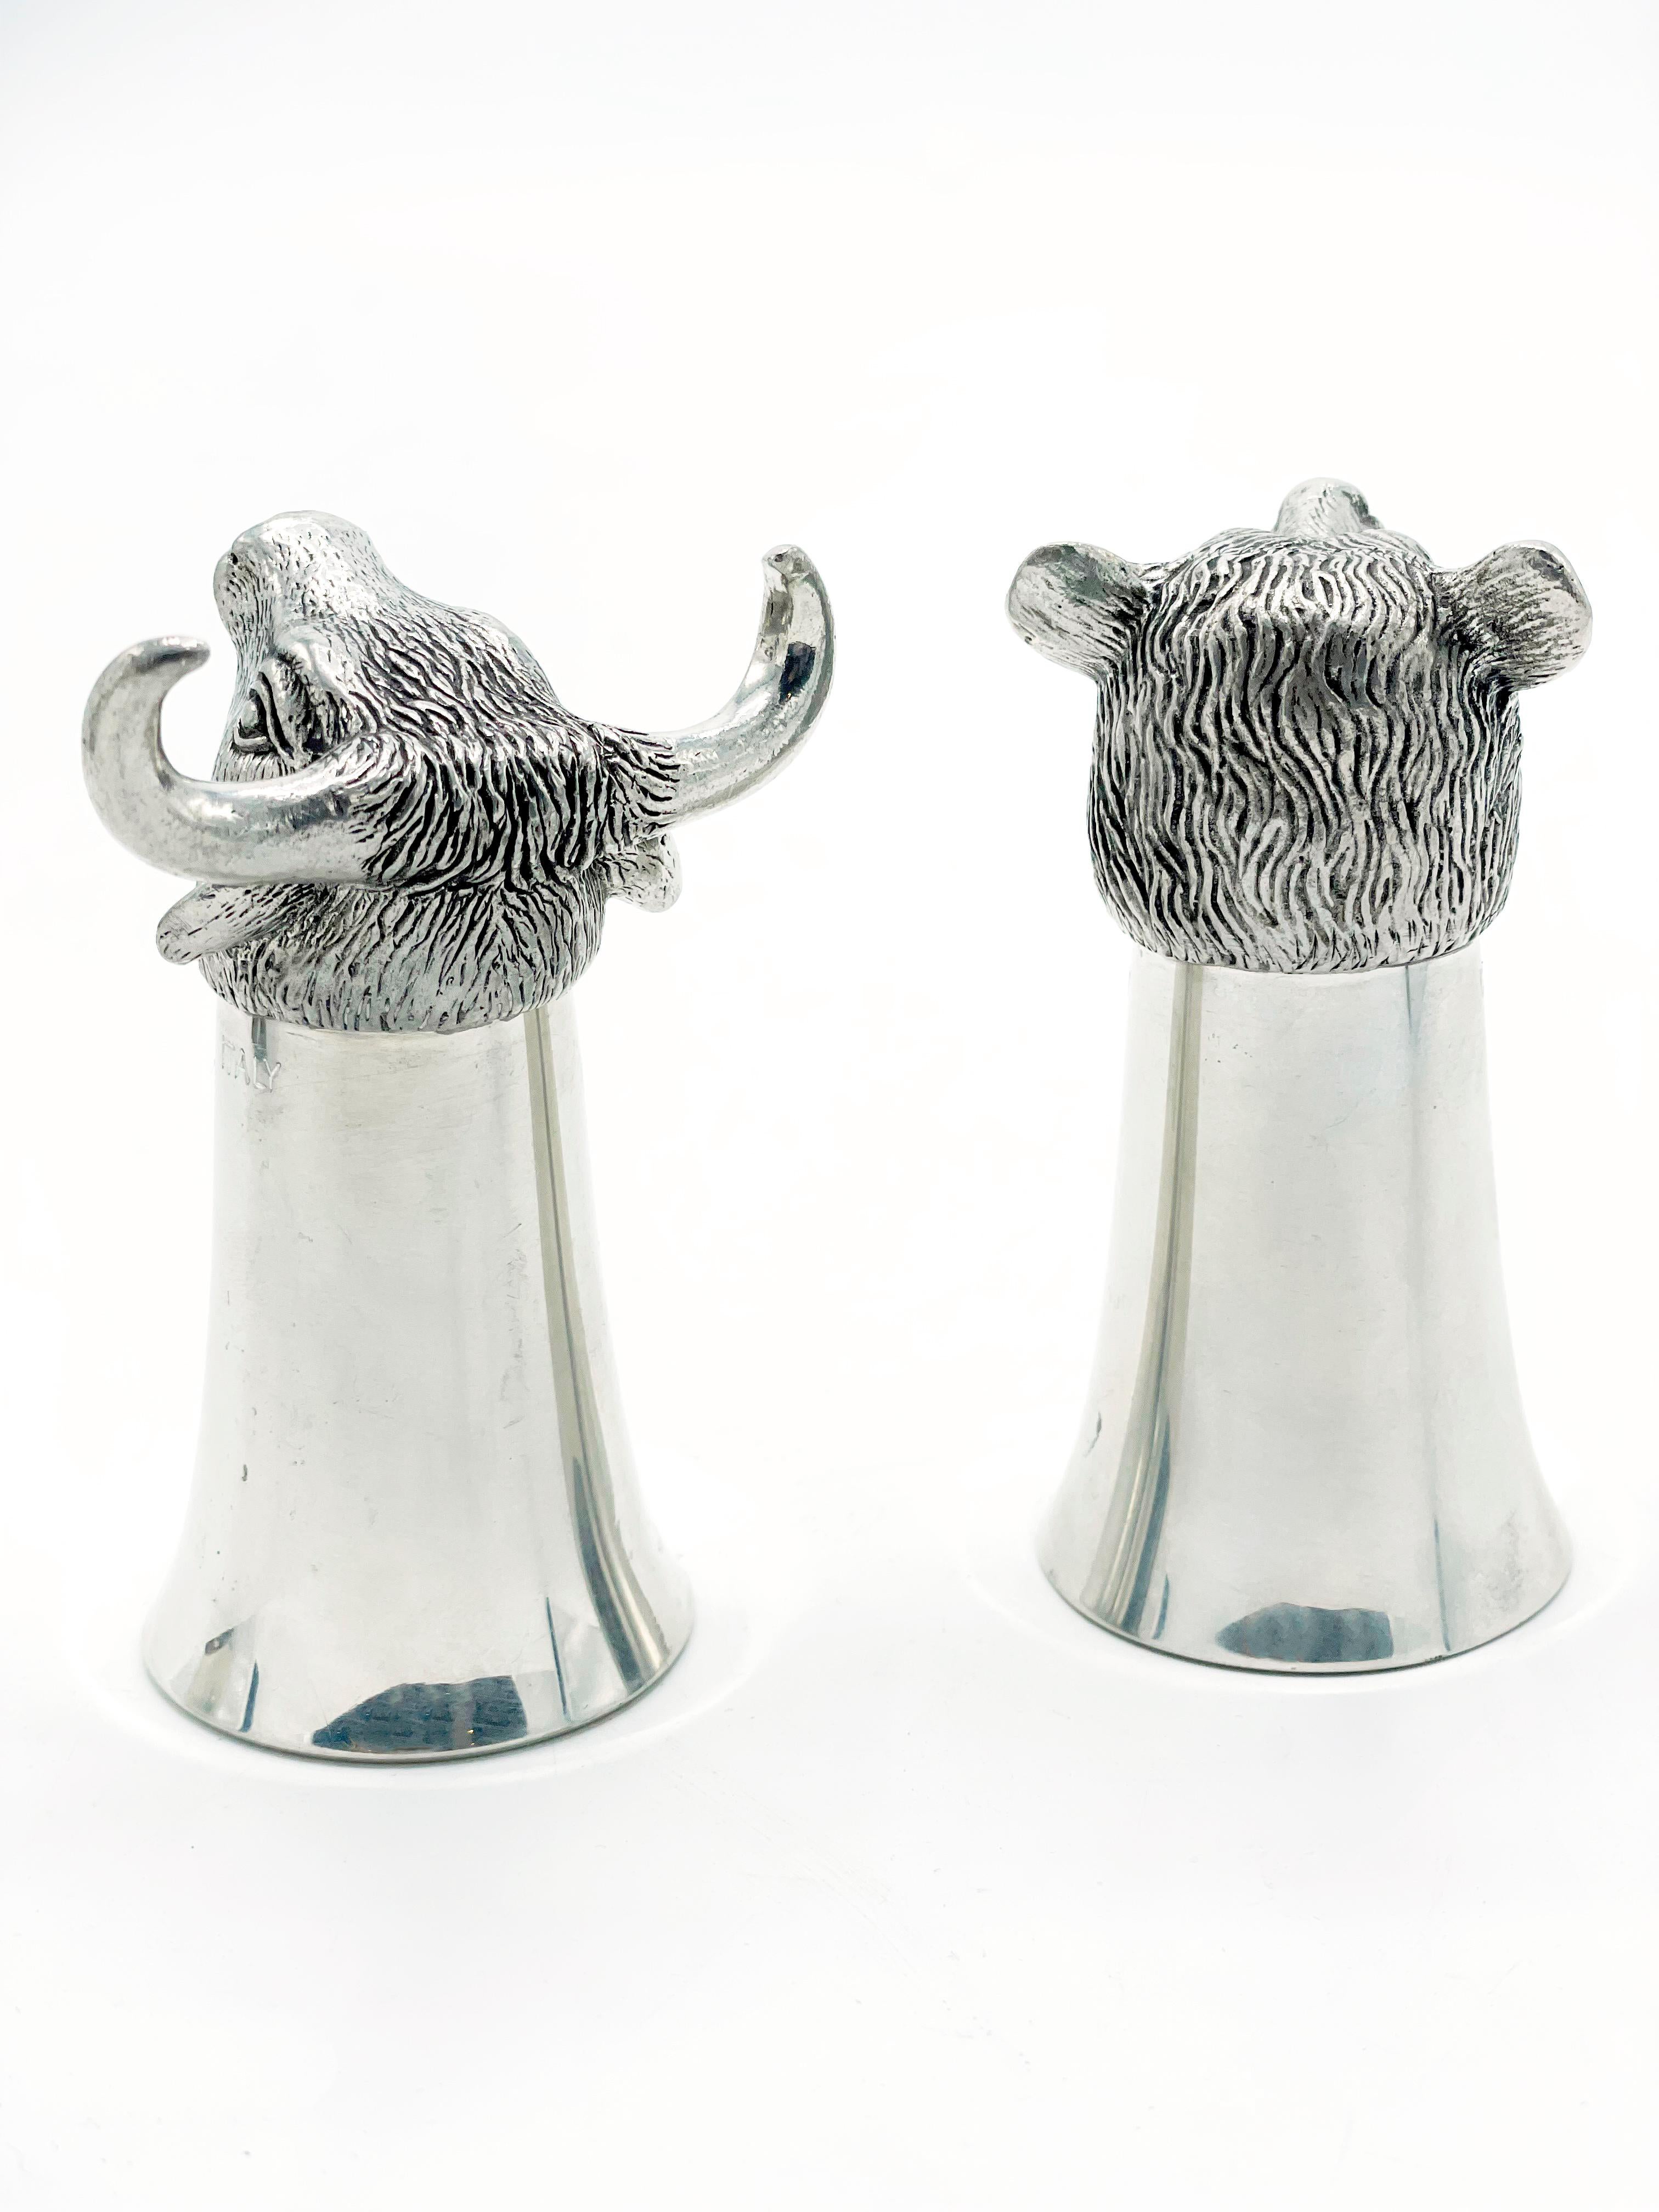 French Gucci Silver Animals, Signed Italy 1970, set of 2 For Sale